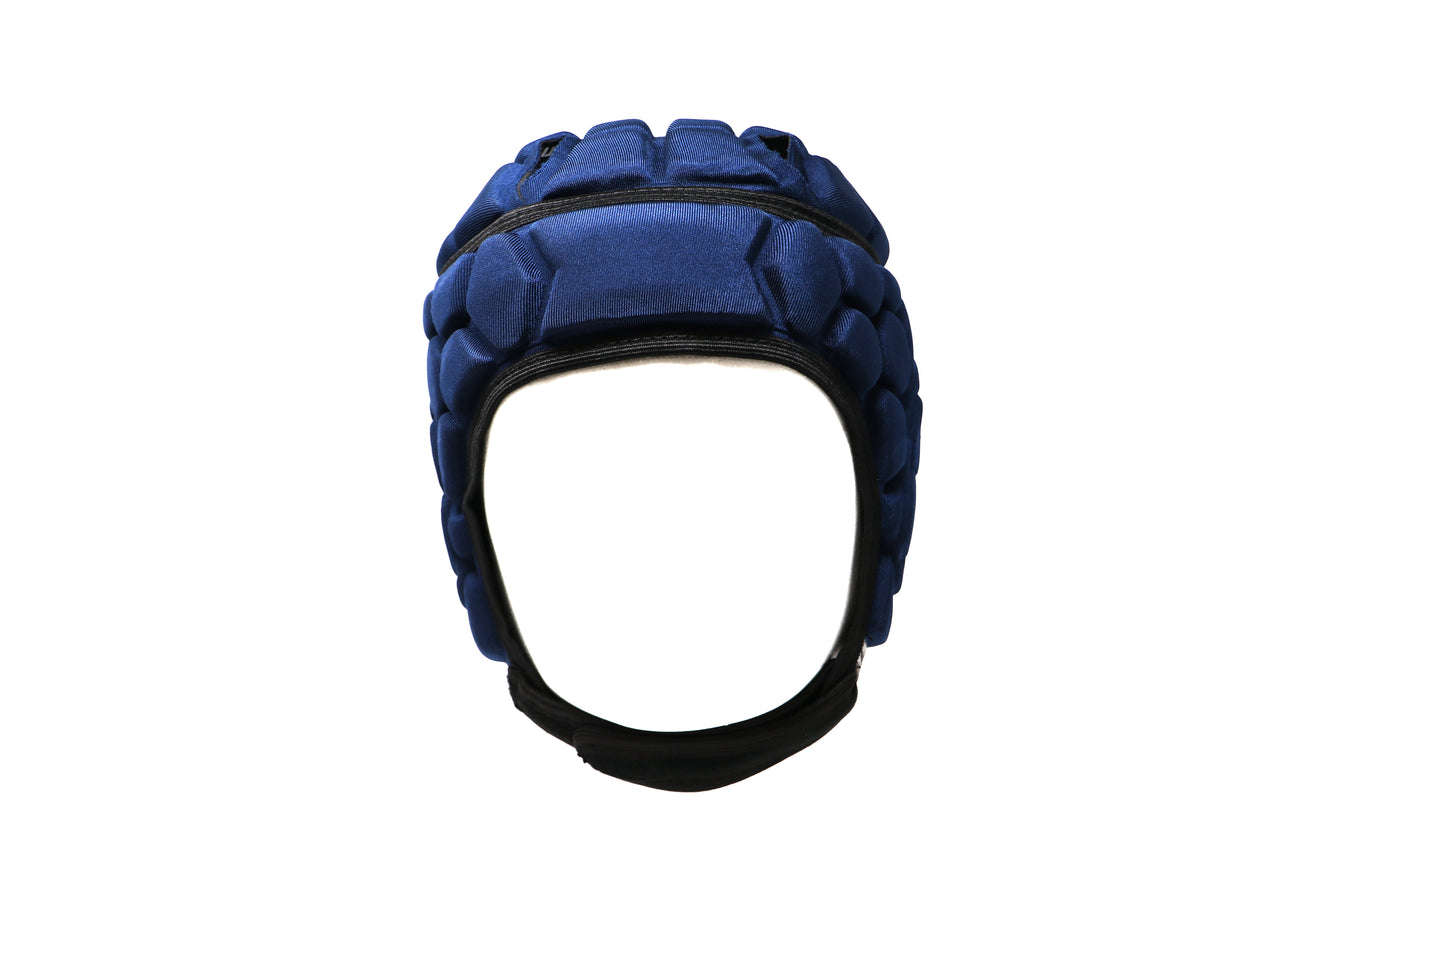 HEAT PRO competition rugby headgear